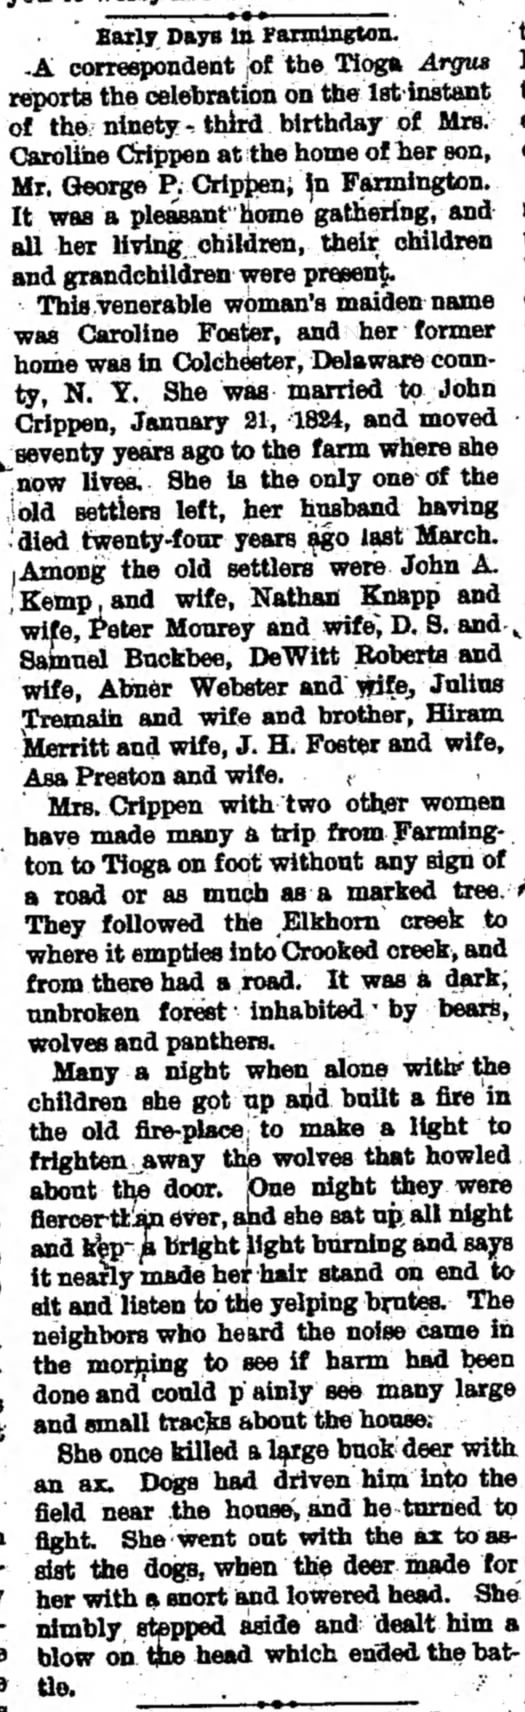 lists asa preston as one of the first settlers of Farmington township